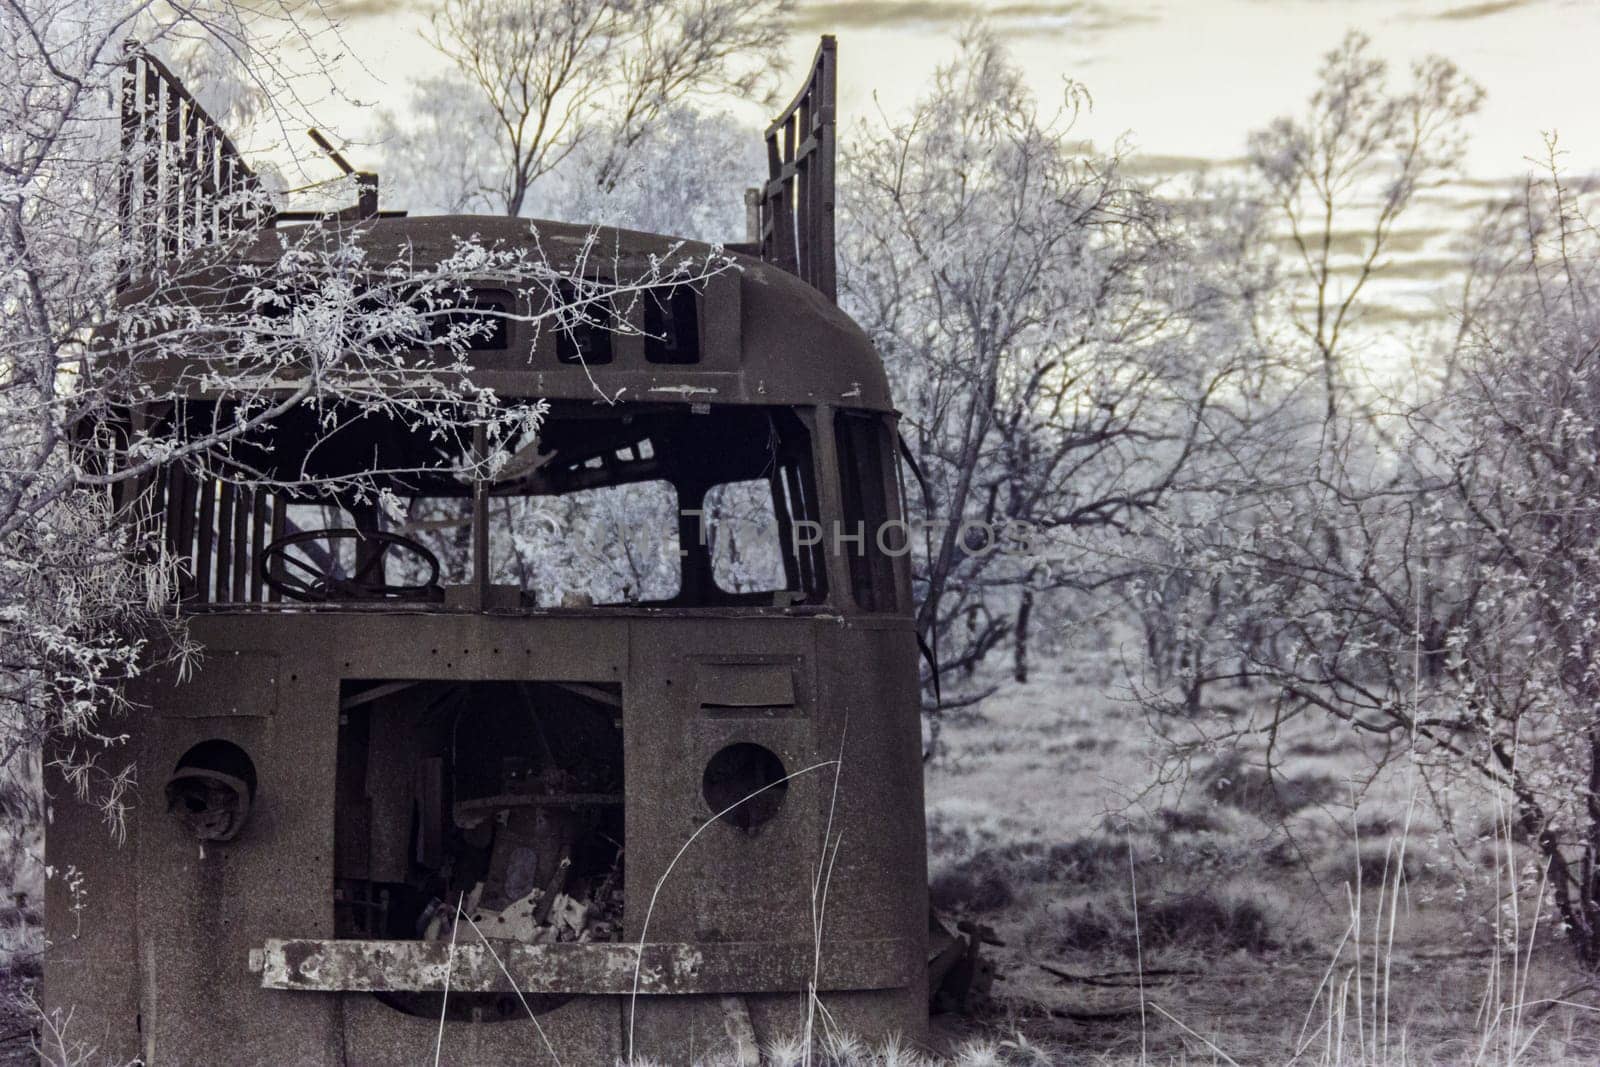 Infrared wavelength photo of a derelict bus abandoned in the Australian outback, surrounded by overgrown trees and grasses.